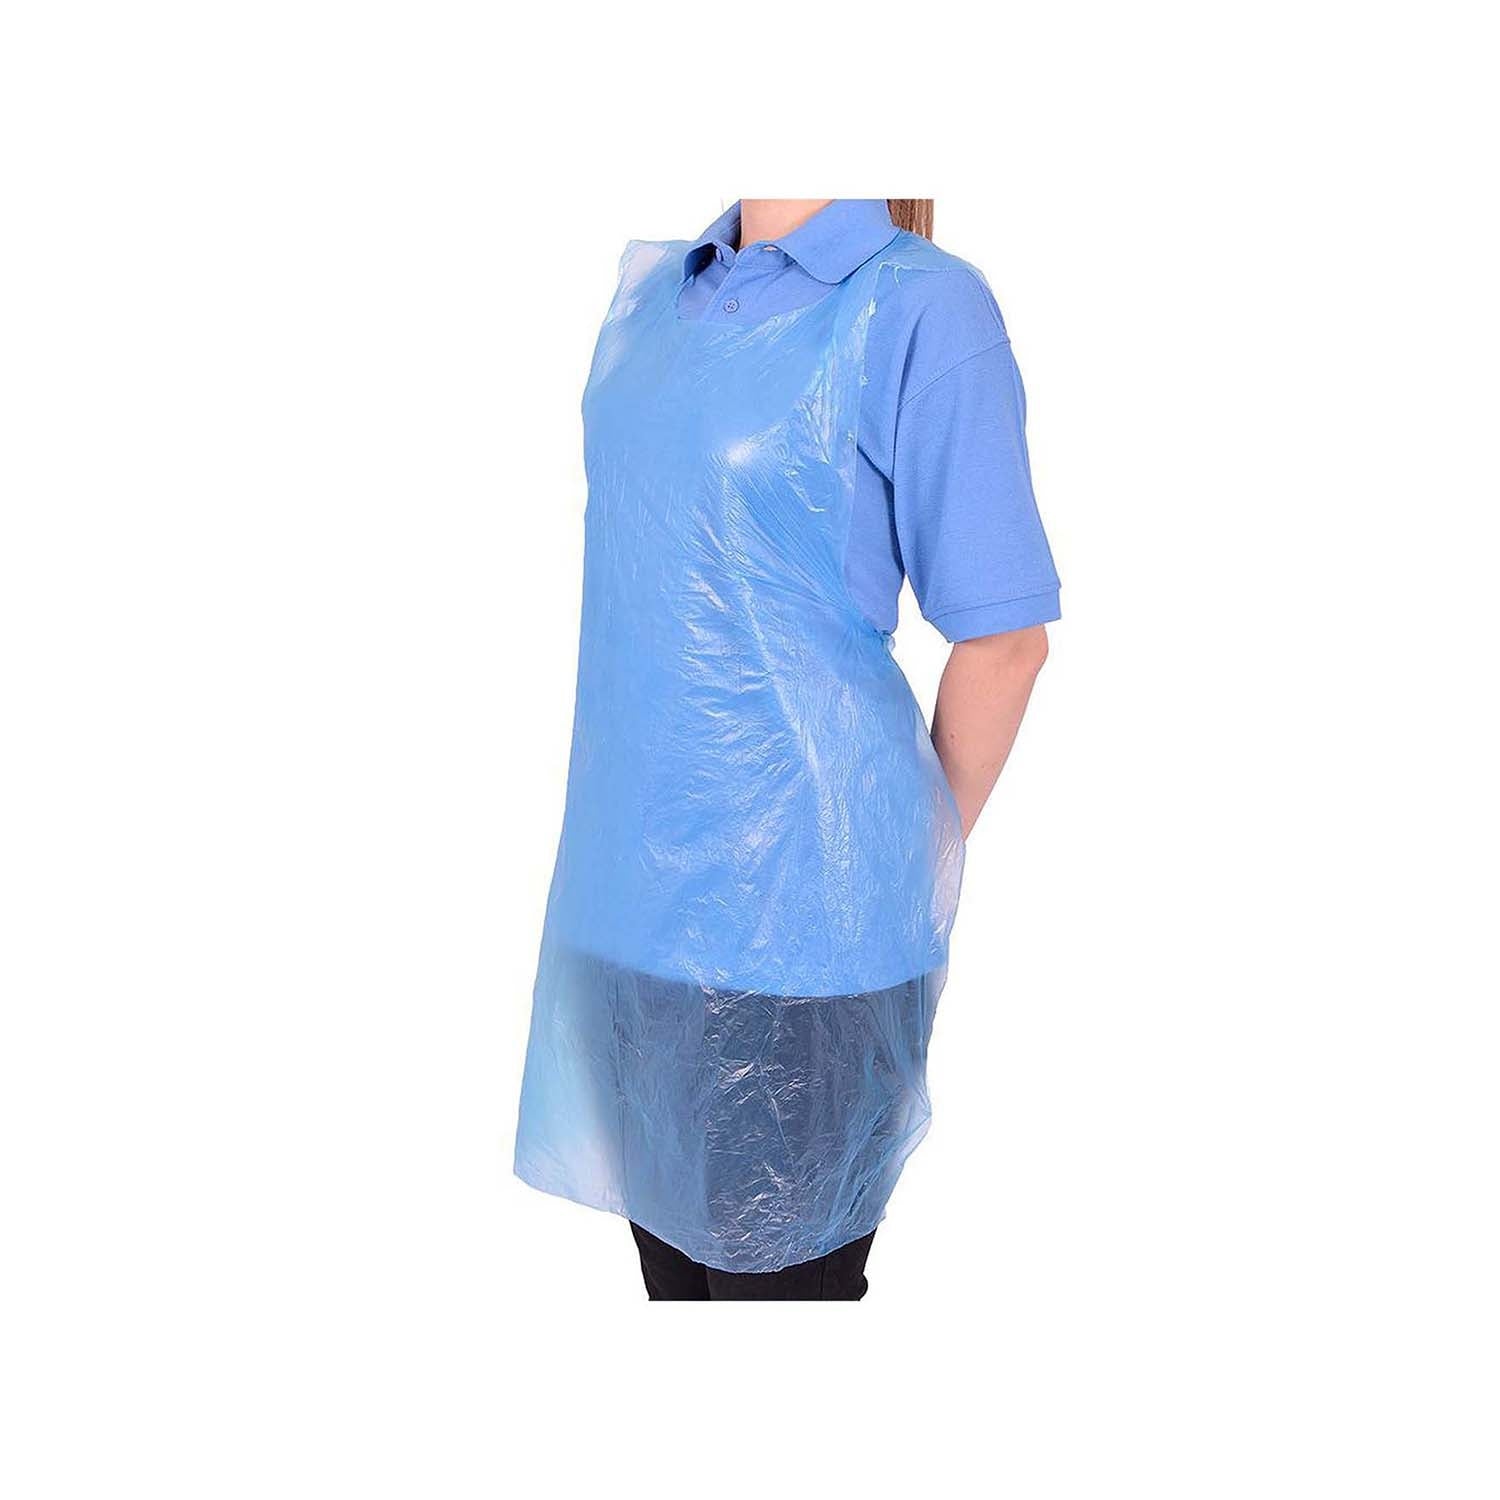 Blue Aprons On Rolls | Roll of 200 (1)